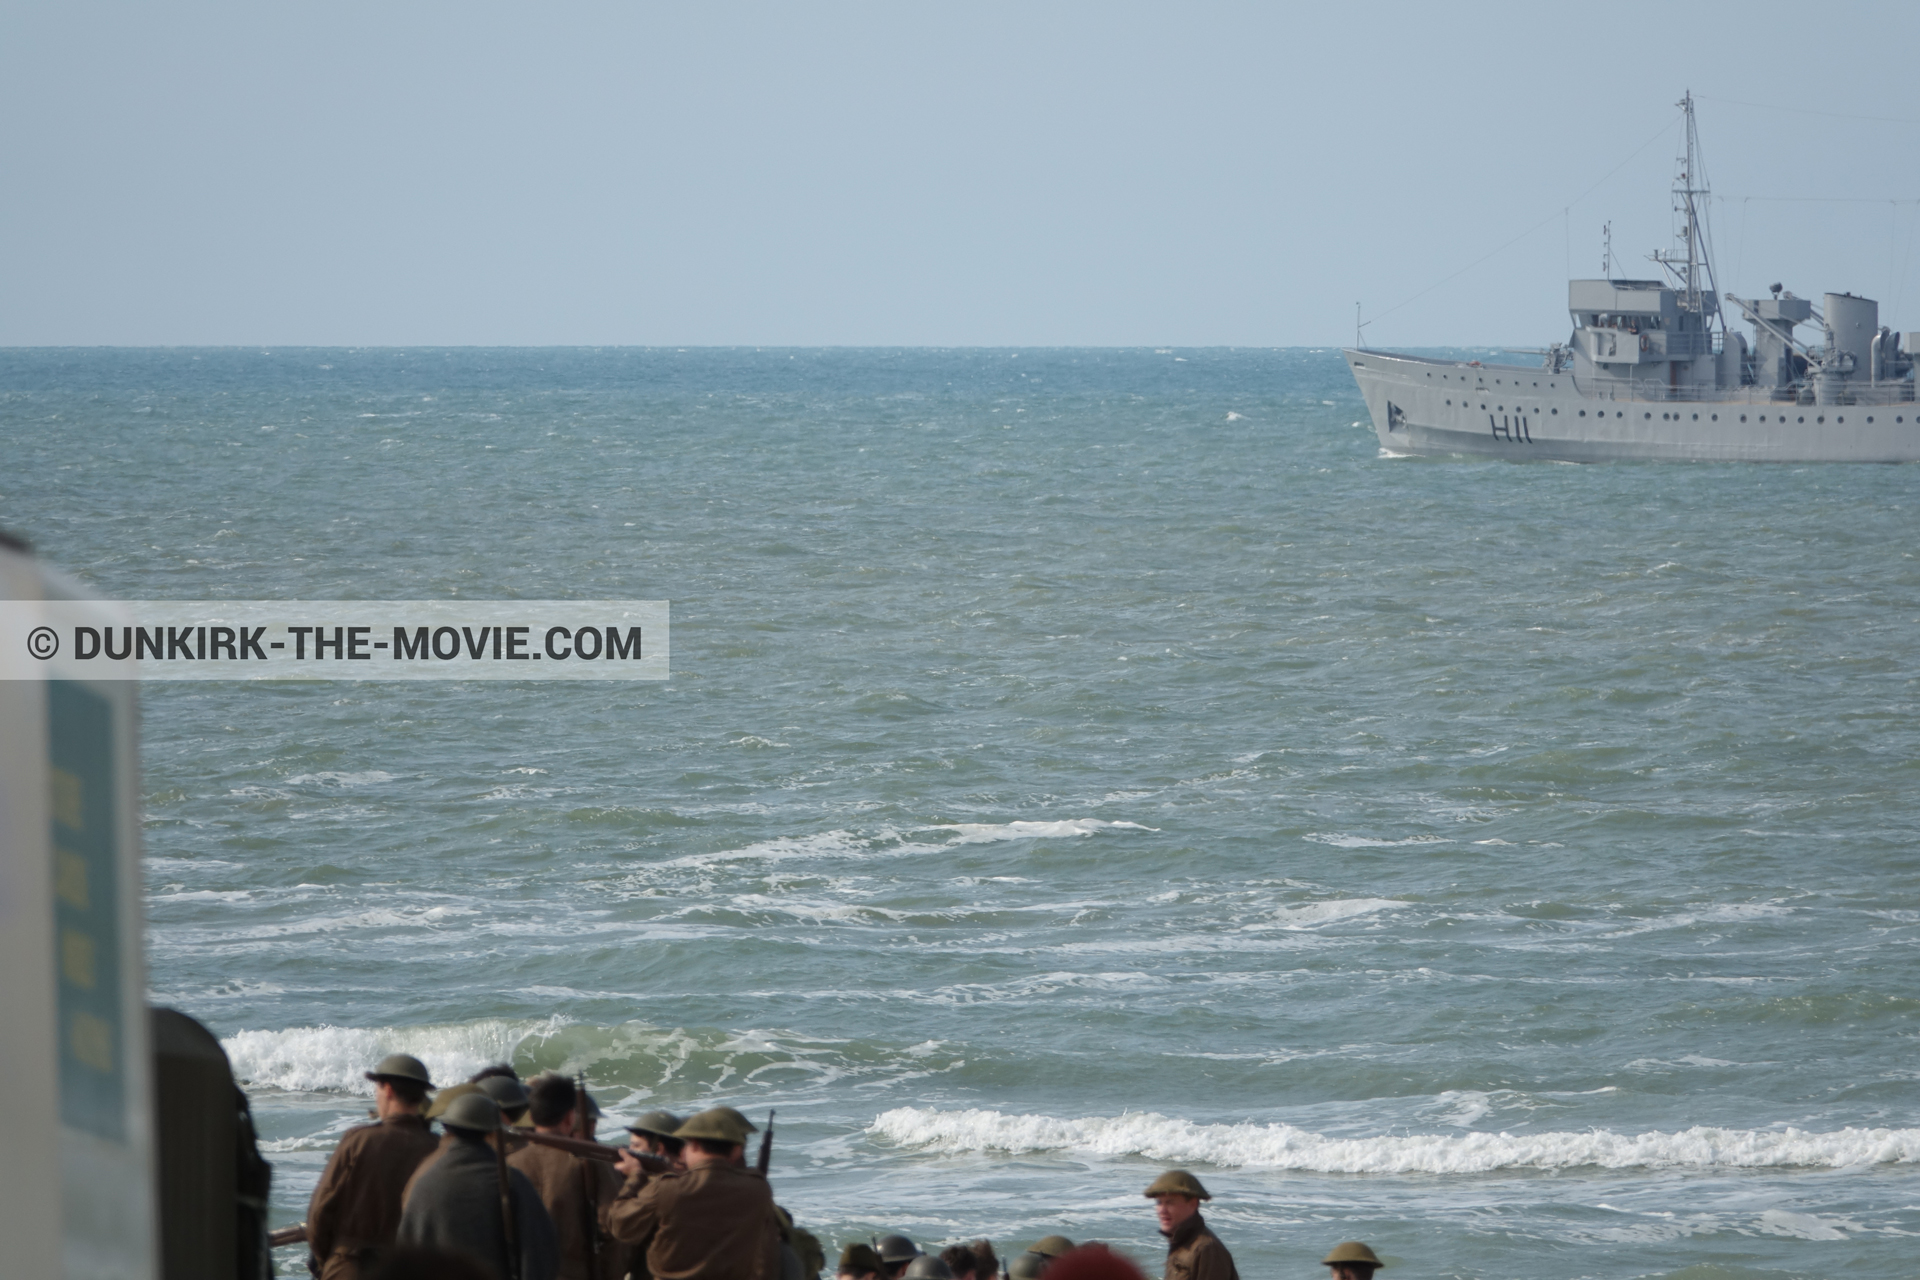 Picture with boat, supernumeraries, rough sea,  from behind the scene of the Dunkirk movie by Nolan